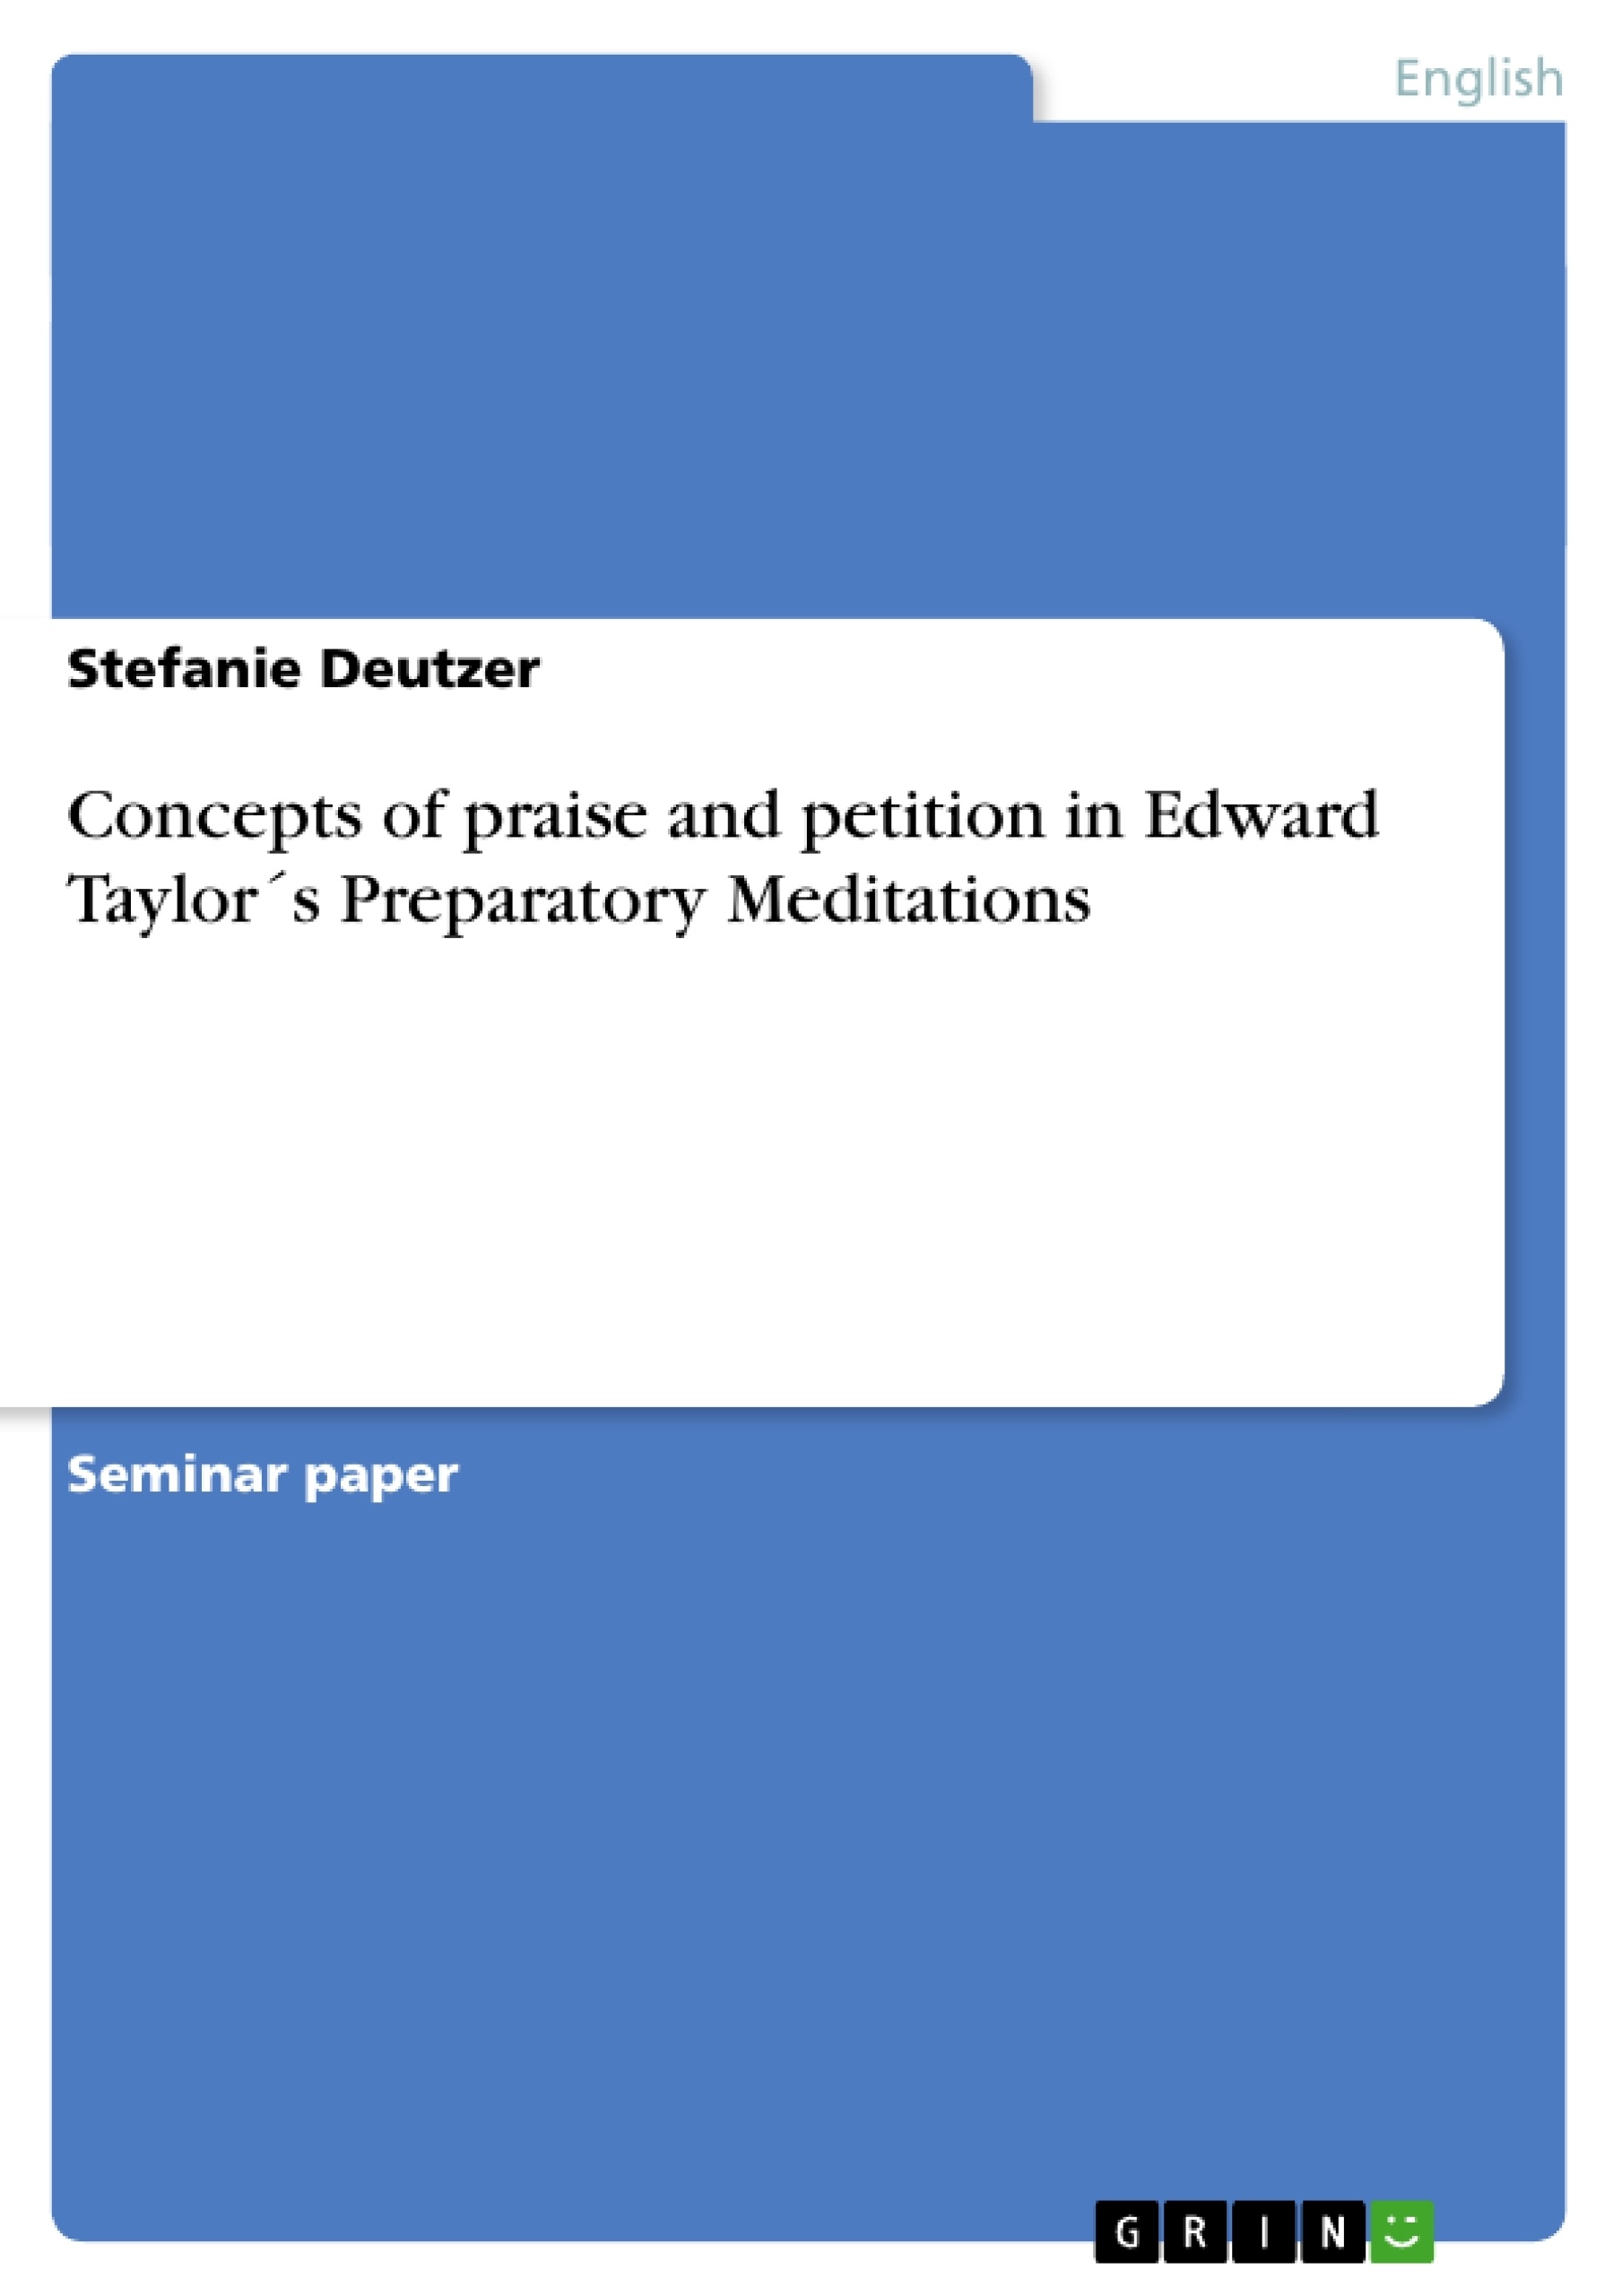 Title: Concepts of praise and petition in Edward Taylor´s Preparatory Meditations